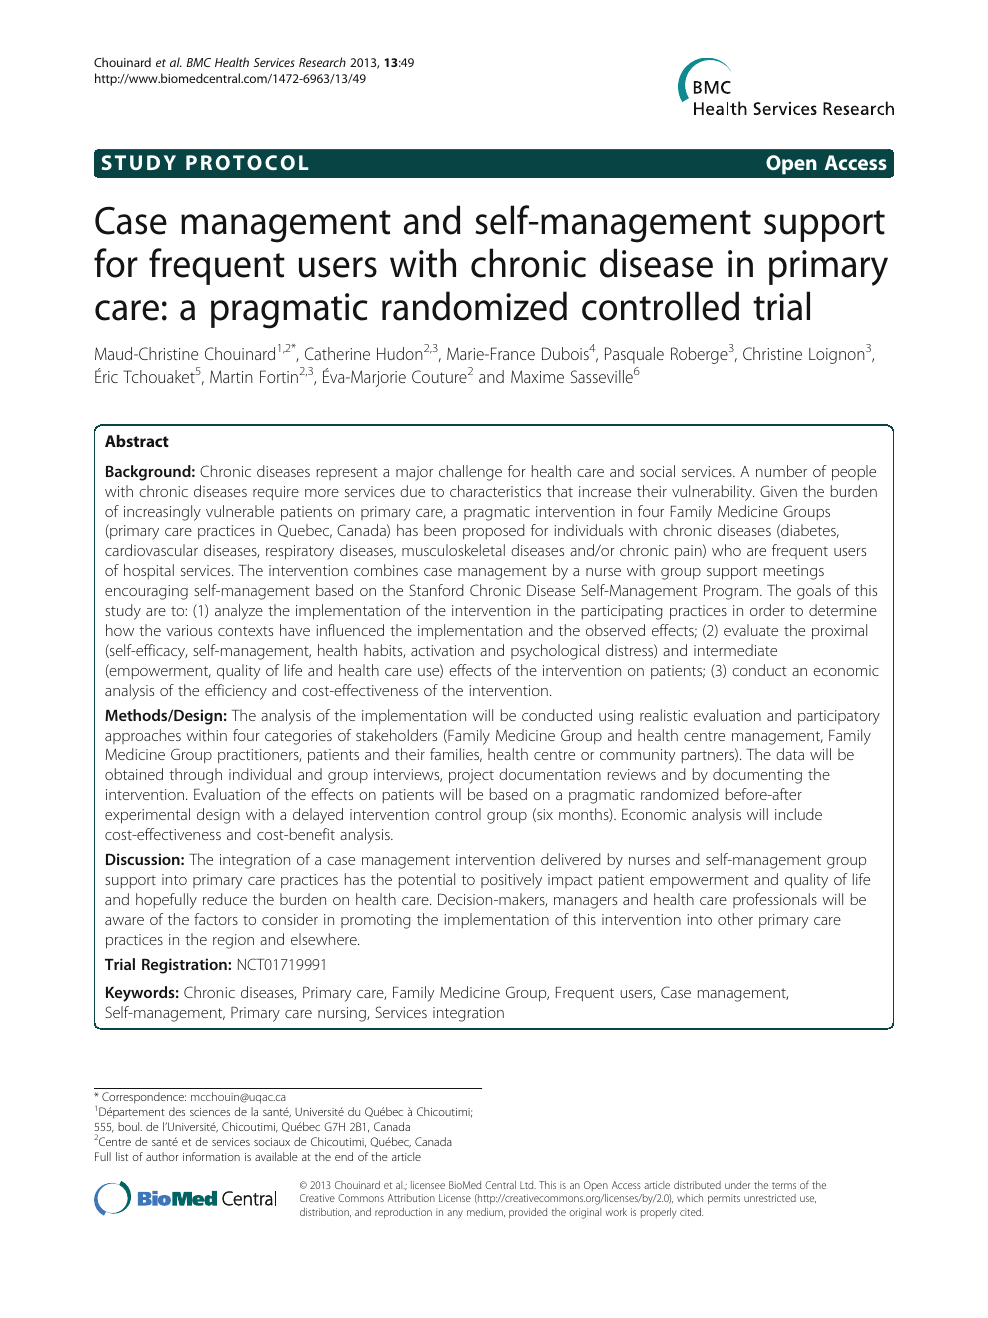 The Partners in Health scale: The development and psychometric properties  of a generic assessment scale for chronic condition self-management